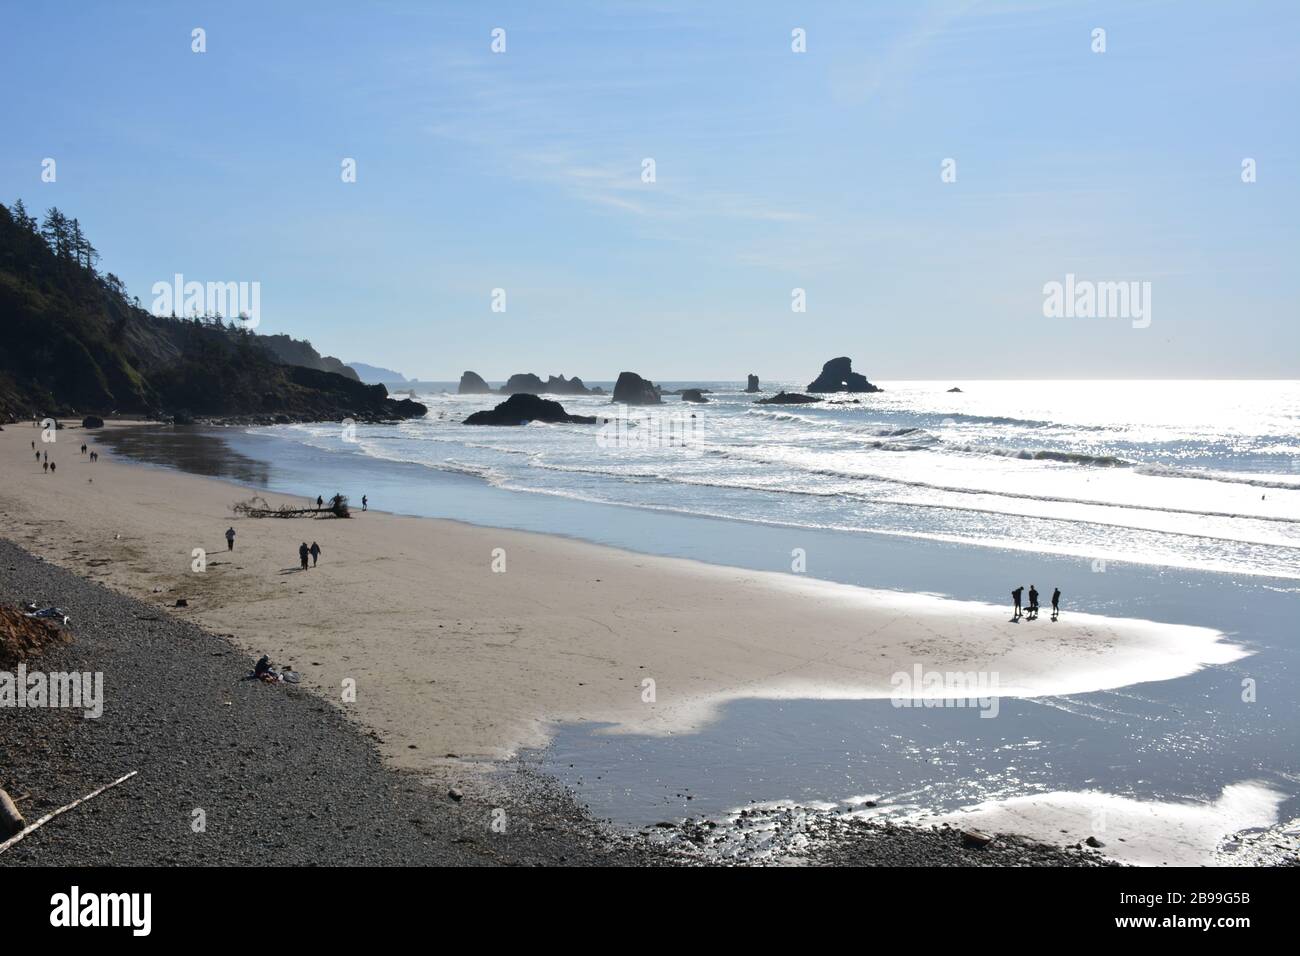 Looking down onto Indian Beach in afternoon light at Ecola State Park, Clatsop County, Oregon Coast, USA. Stock Photo